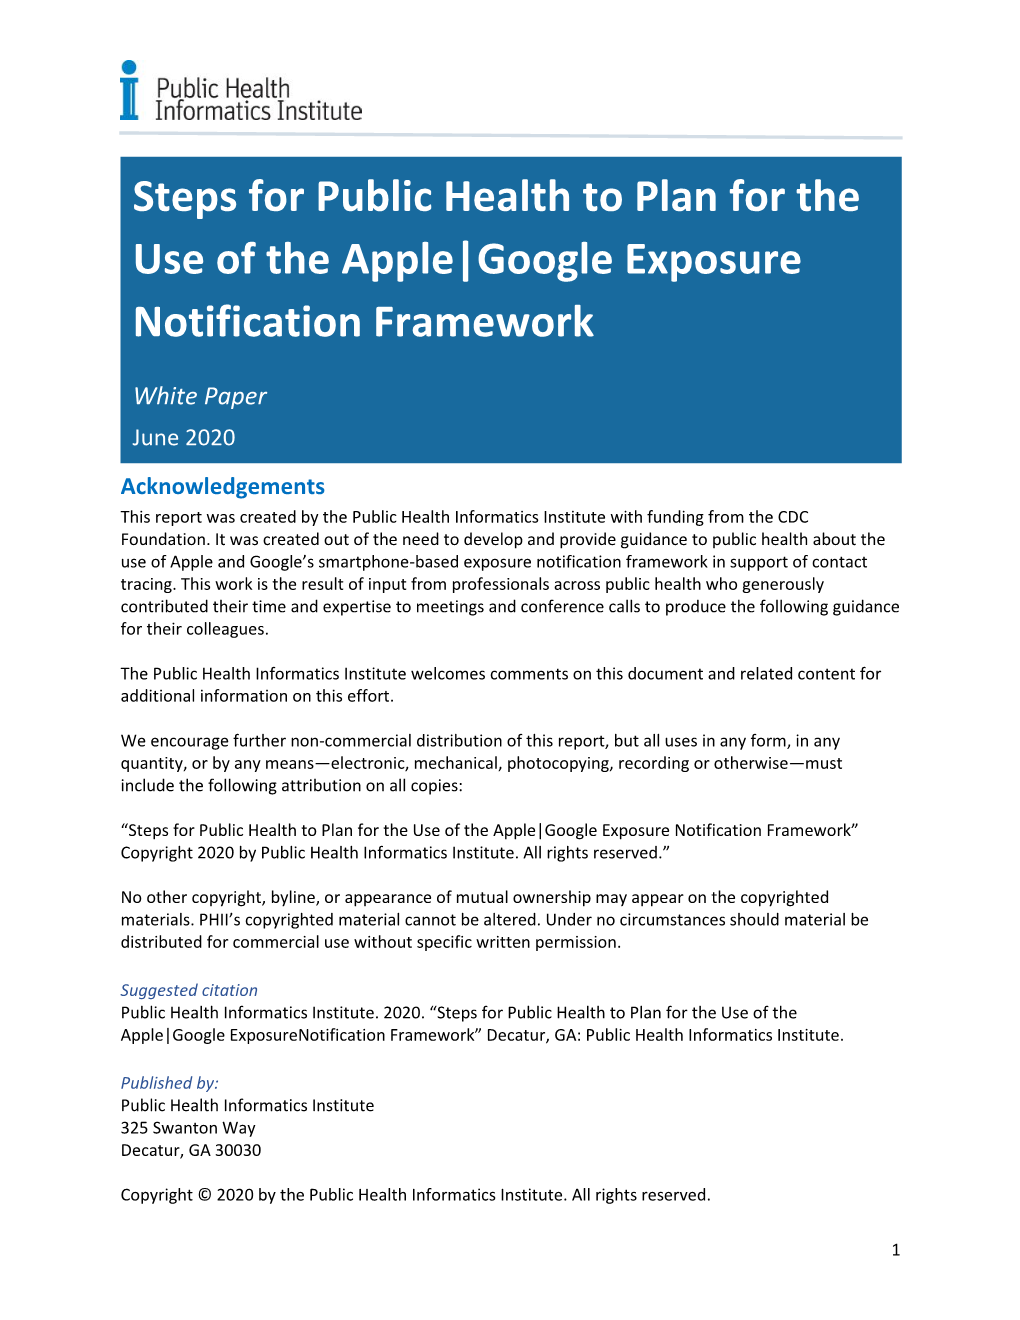 Steps for Public Health to Plan for the Use of the Apple|Google Exposure Notification Framework